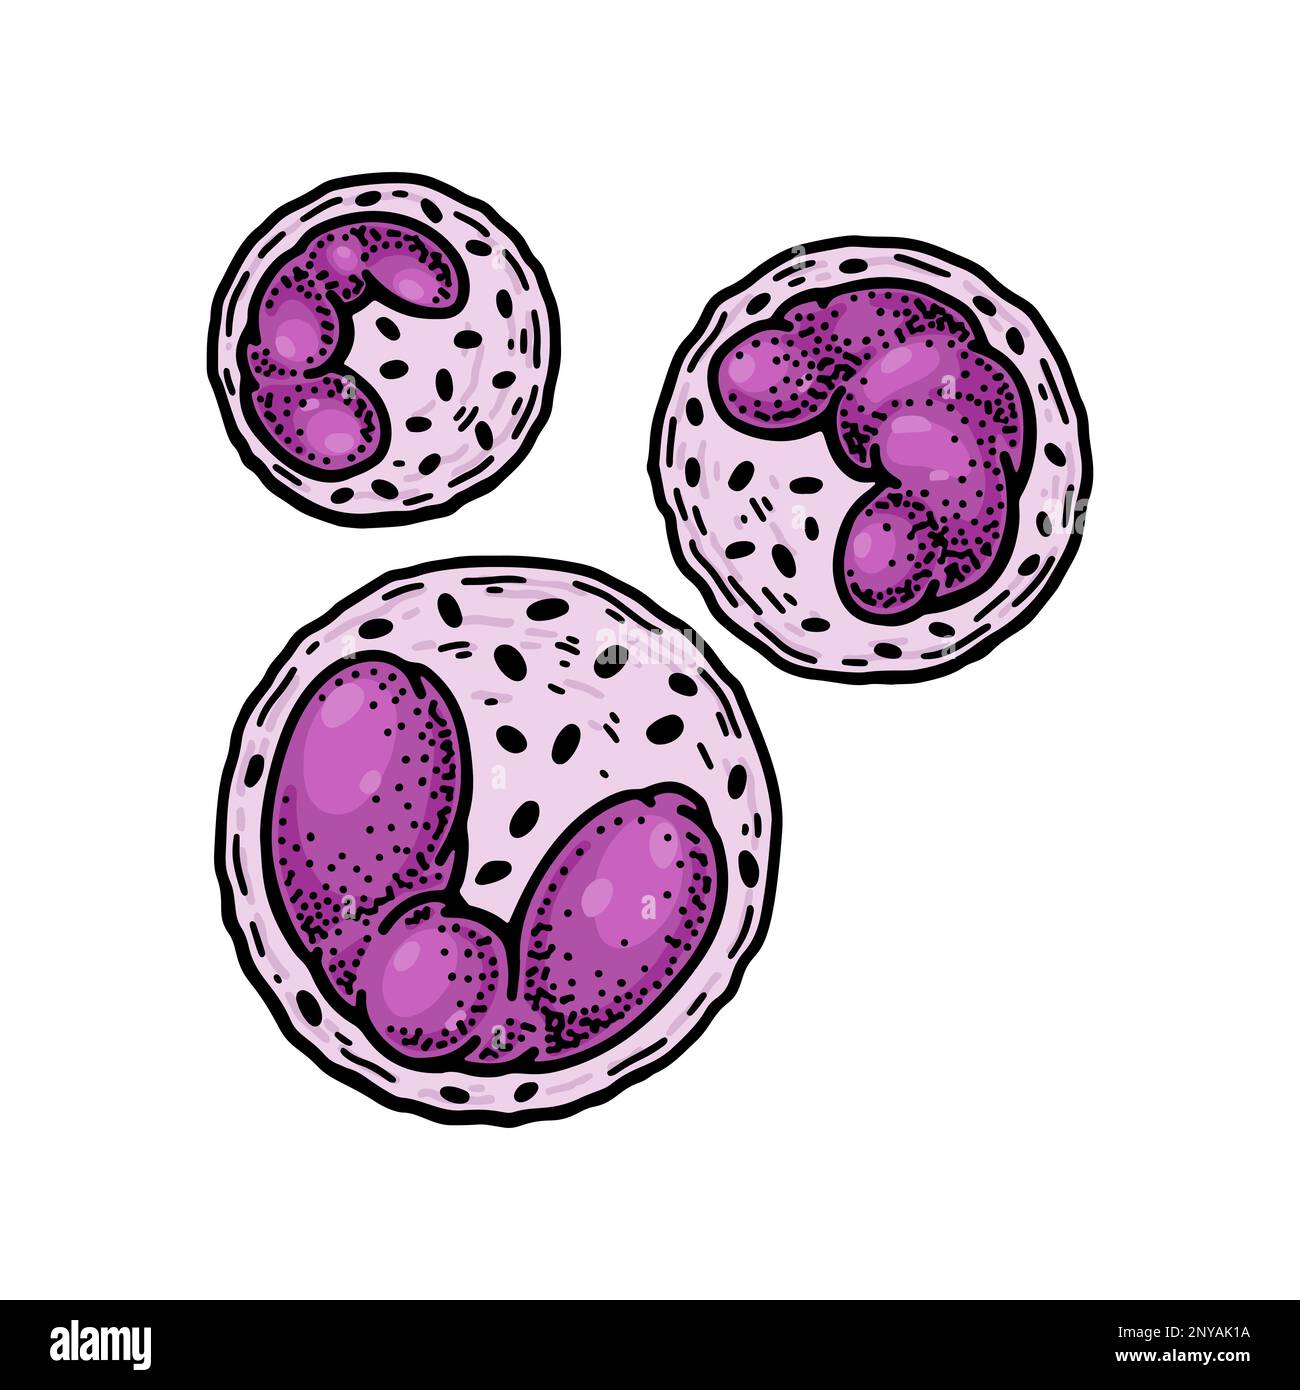 Basophil leukocyte white blood cells isolated on white background. Hand drawn scientific microbiology vector illustration in sketch style Stock Vector